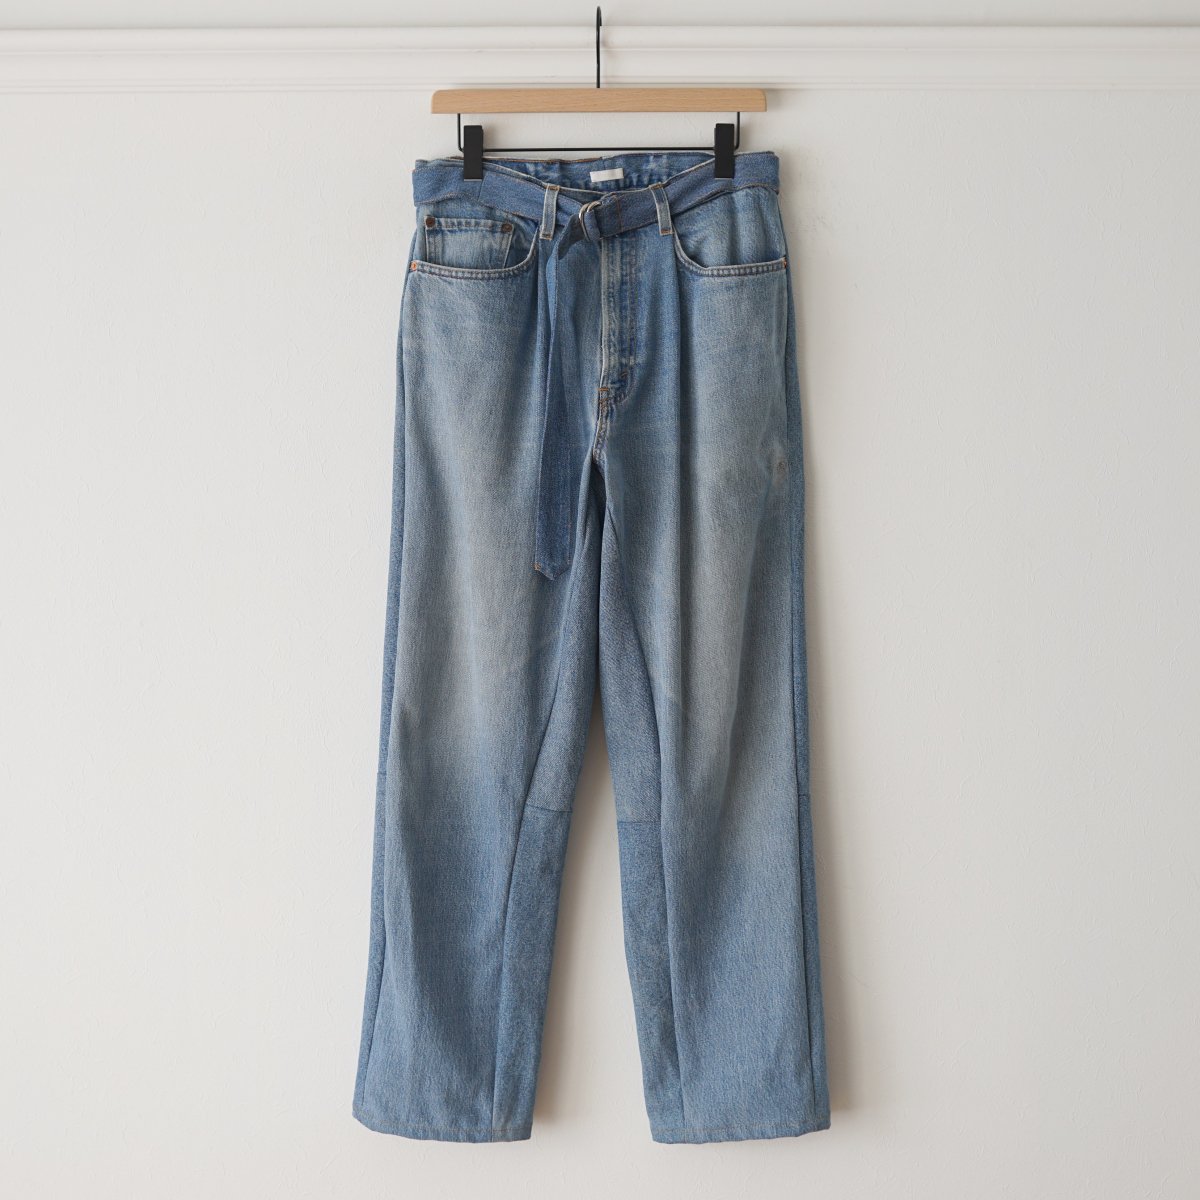 MEMBER ONLYۡSEEALL  RECONSTRUCTED BELTED BUGGY PANTS - DENIM